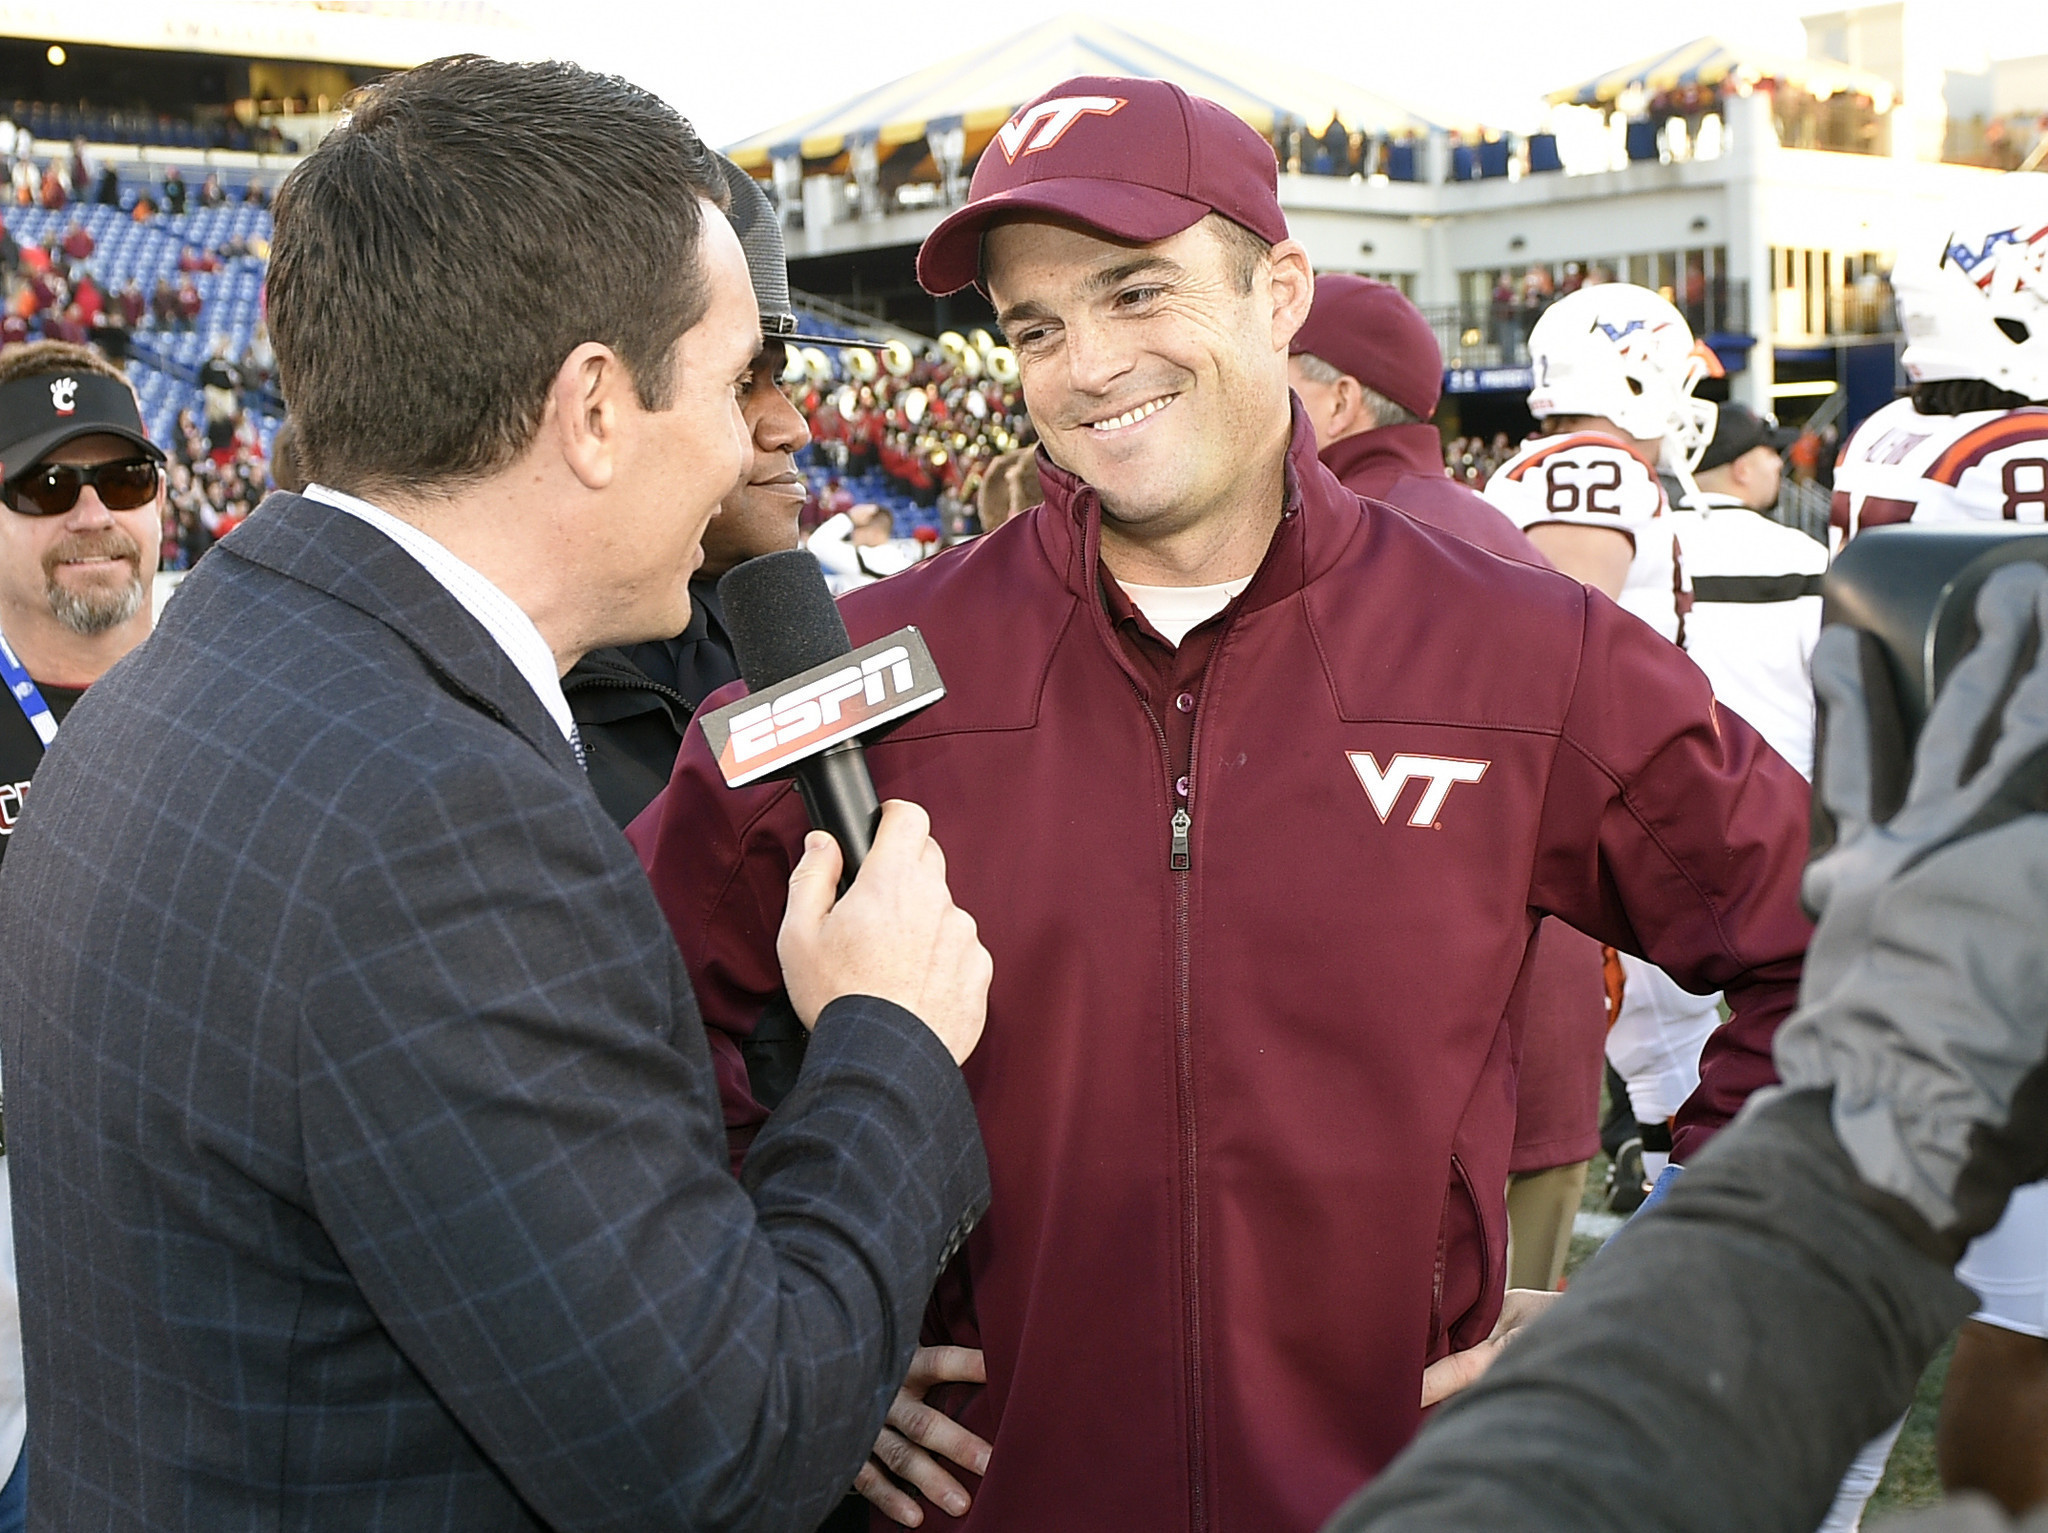 Shane Beamer reflects on VT, Georgia and head-coaching ambitions